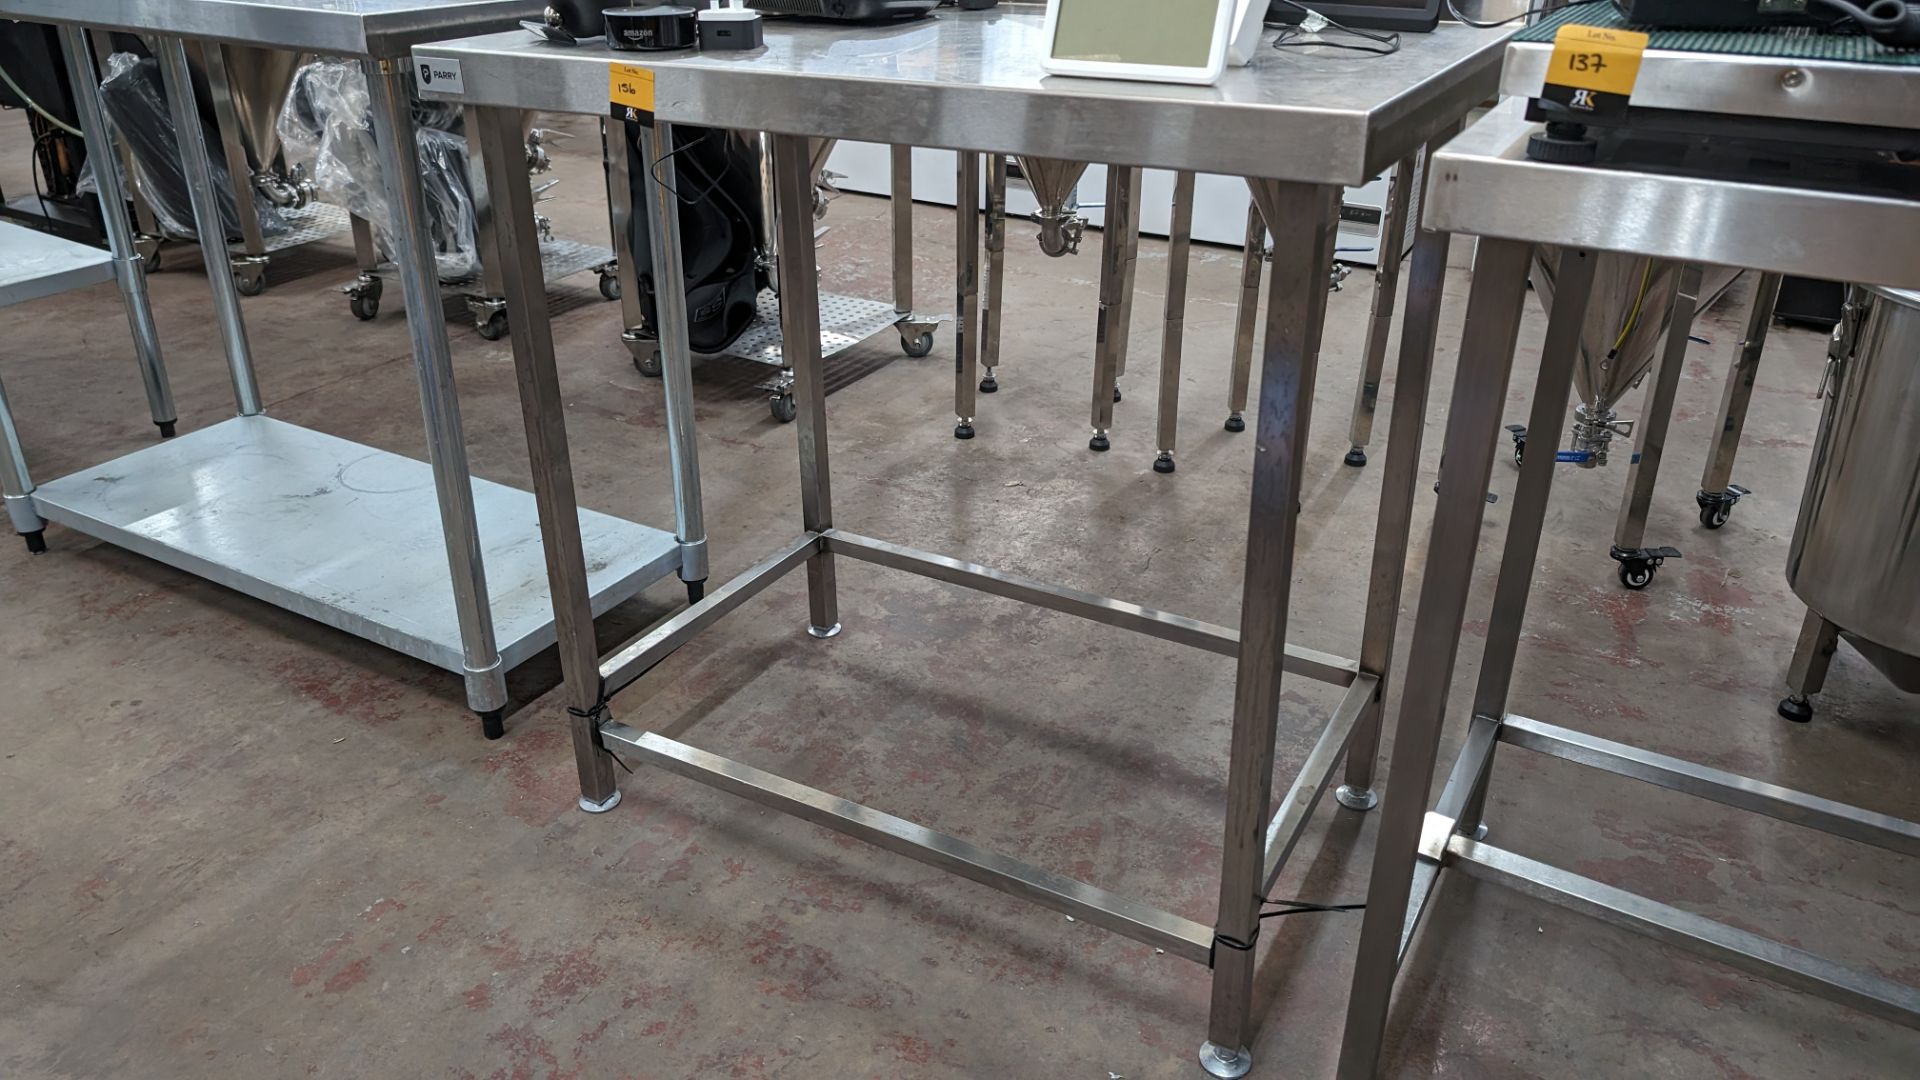 Stainless steel table with upstand at rear, max dimensions: 920mm x 600mm x 900mm - Image 2 of 3